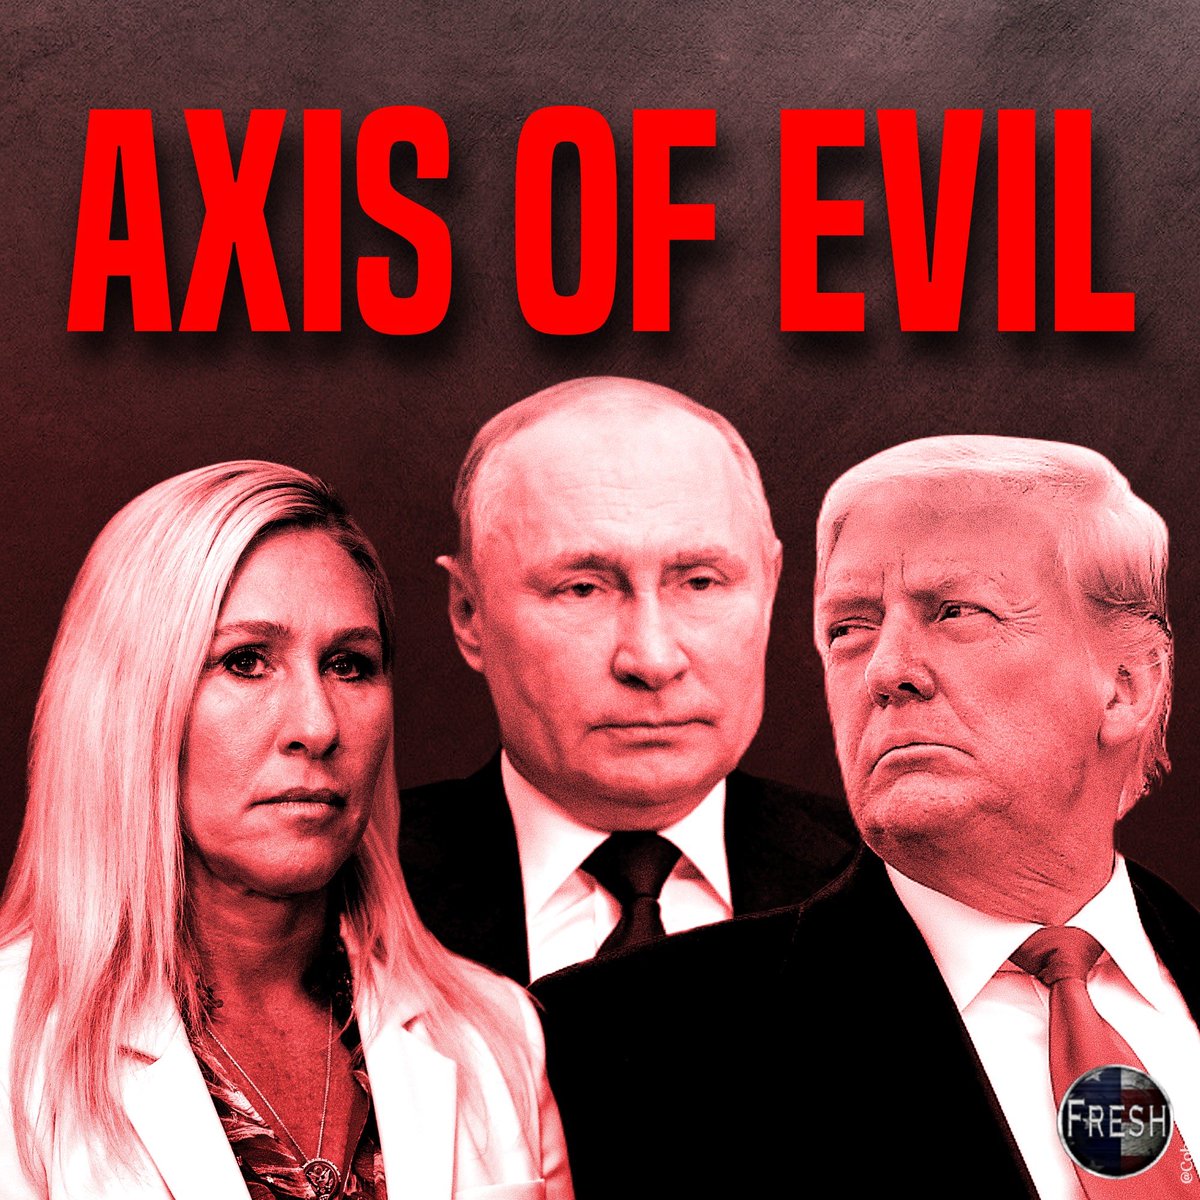 This Axis of Evil will destroy America, burn it to the ground to achieve their goals. They are anti-Democratic, pro Authoritarian, and determined to destroy the United States. Don’t fuck around and find out on November 5th. Losing the Republic is not worth your protest vote.